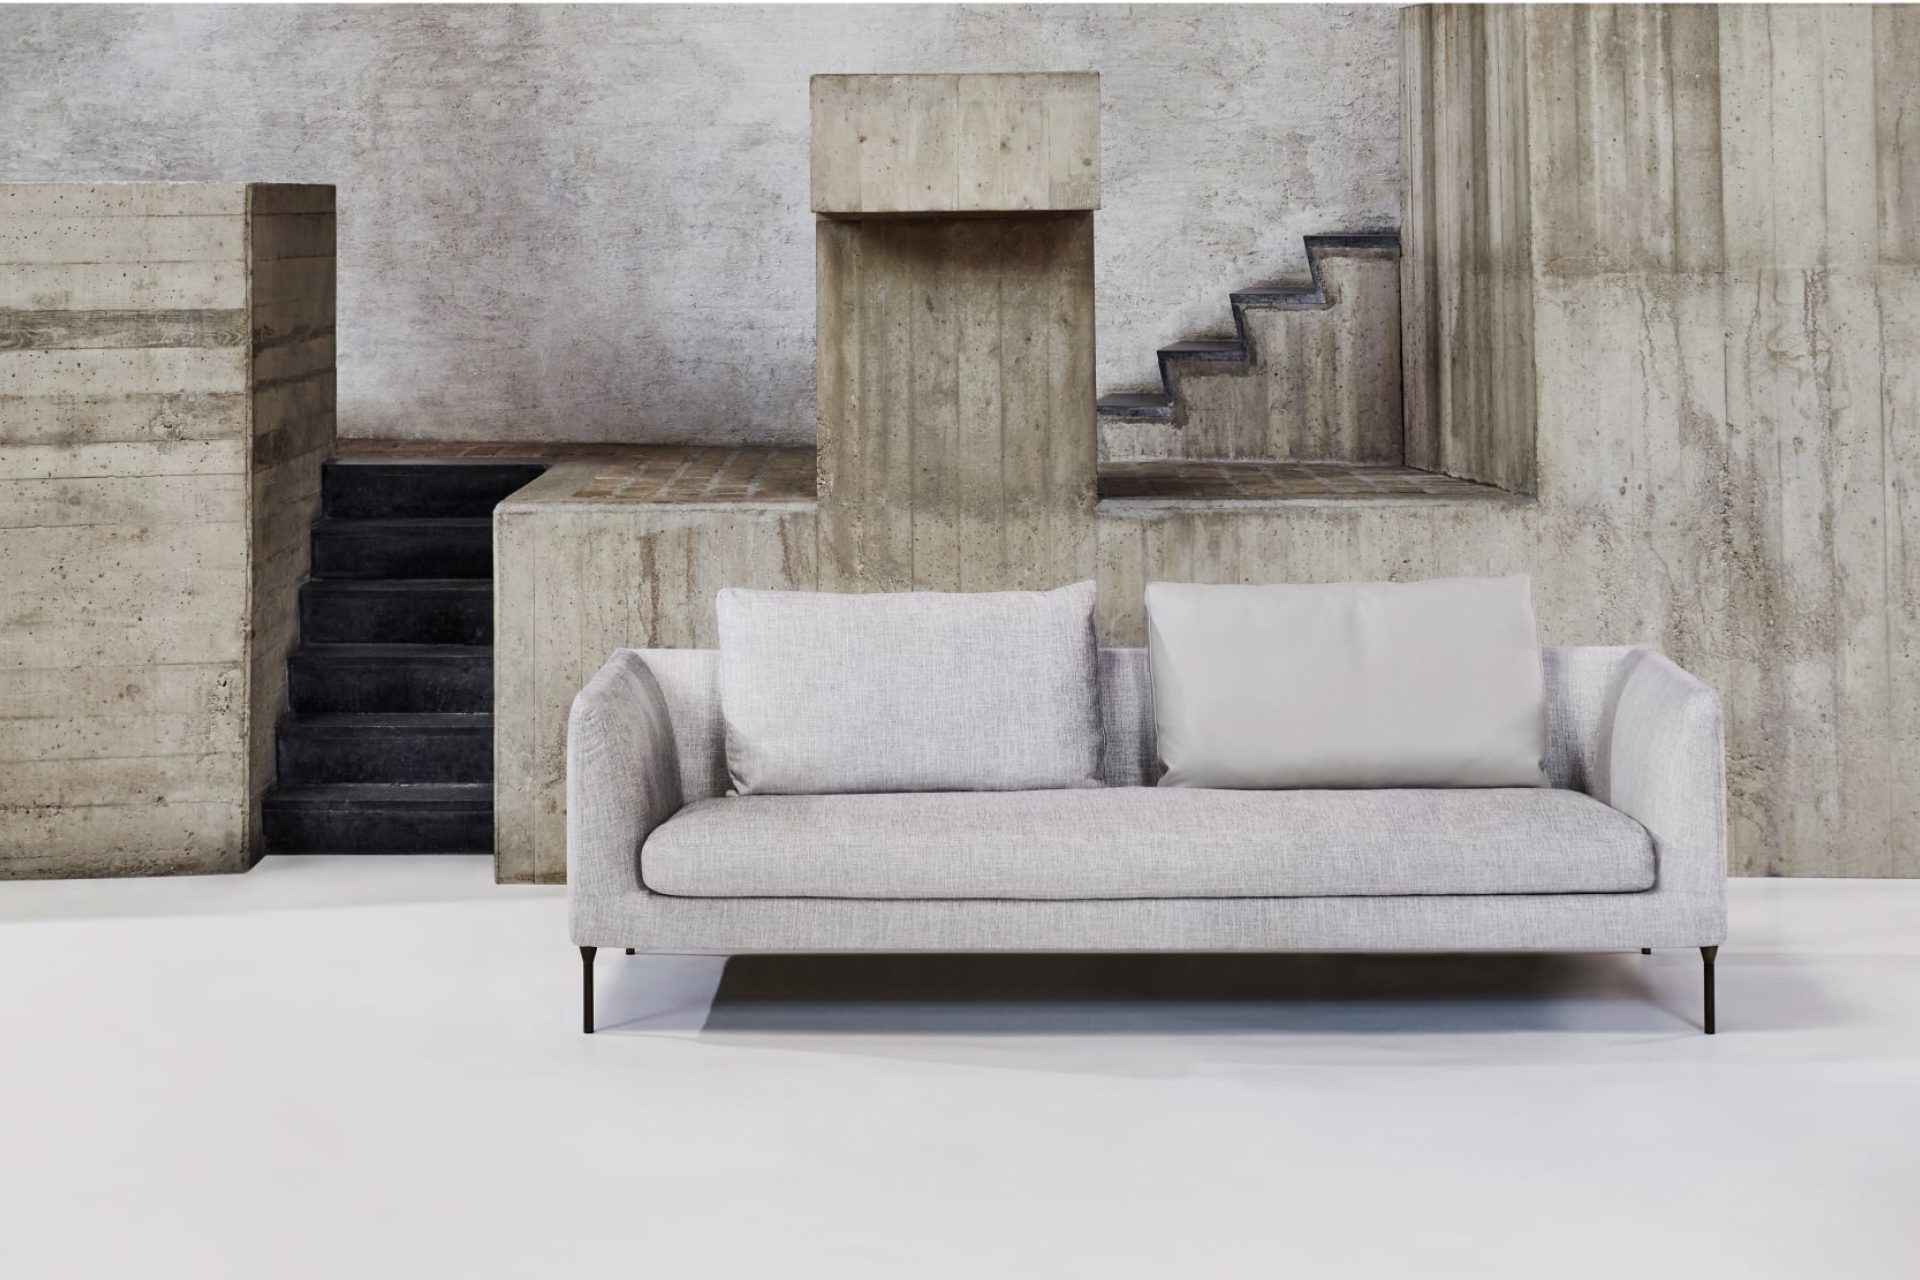 Light grey canvas sofa with steel legs in a modern room with a concrete finish